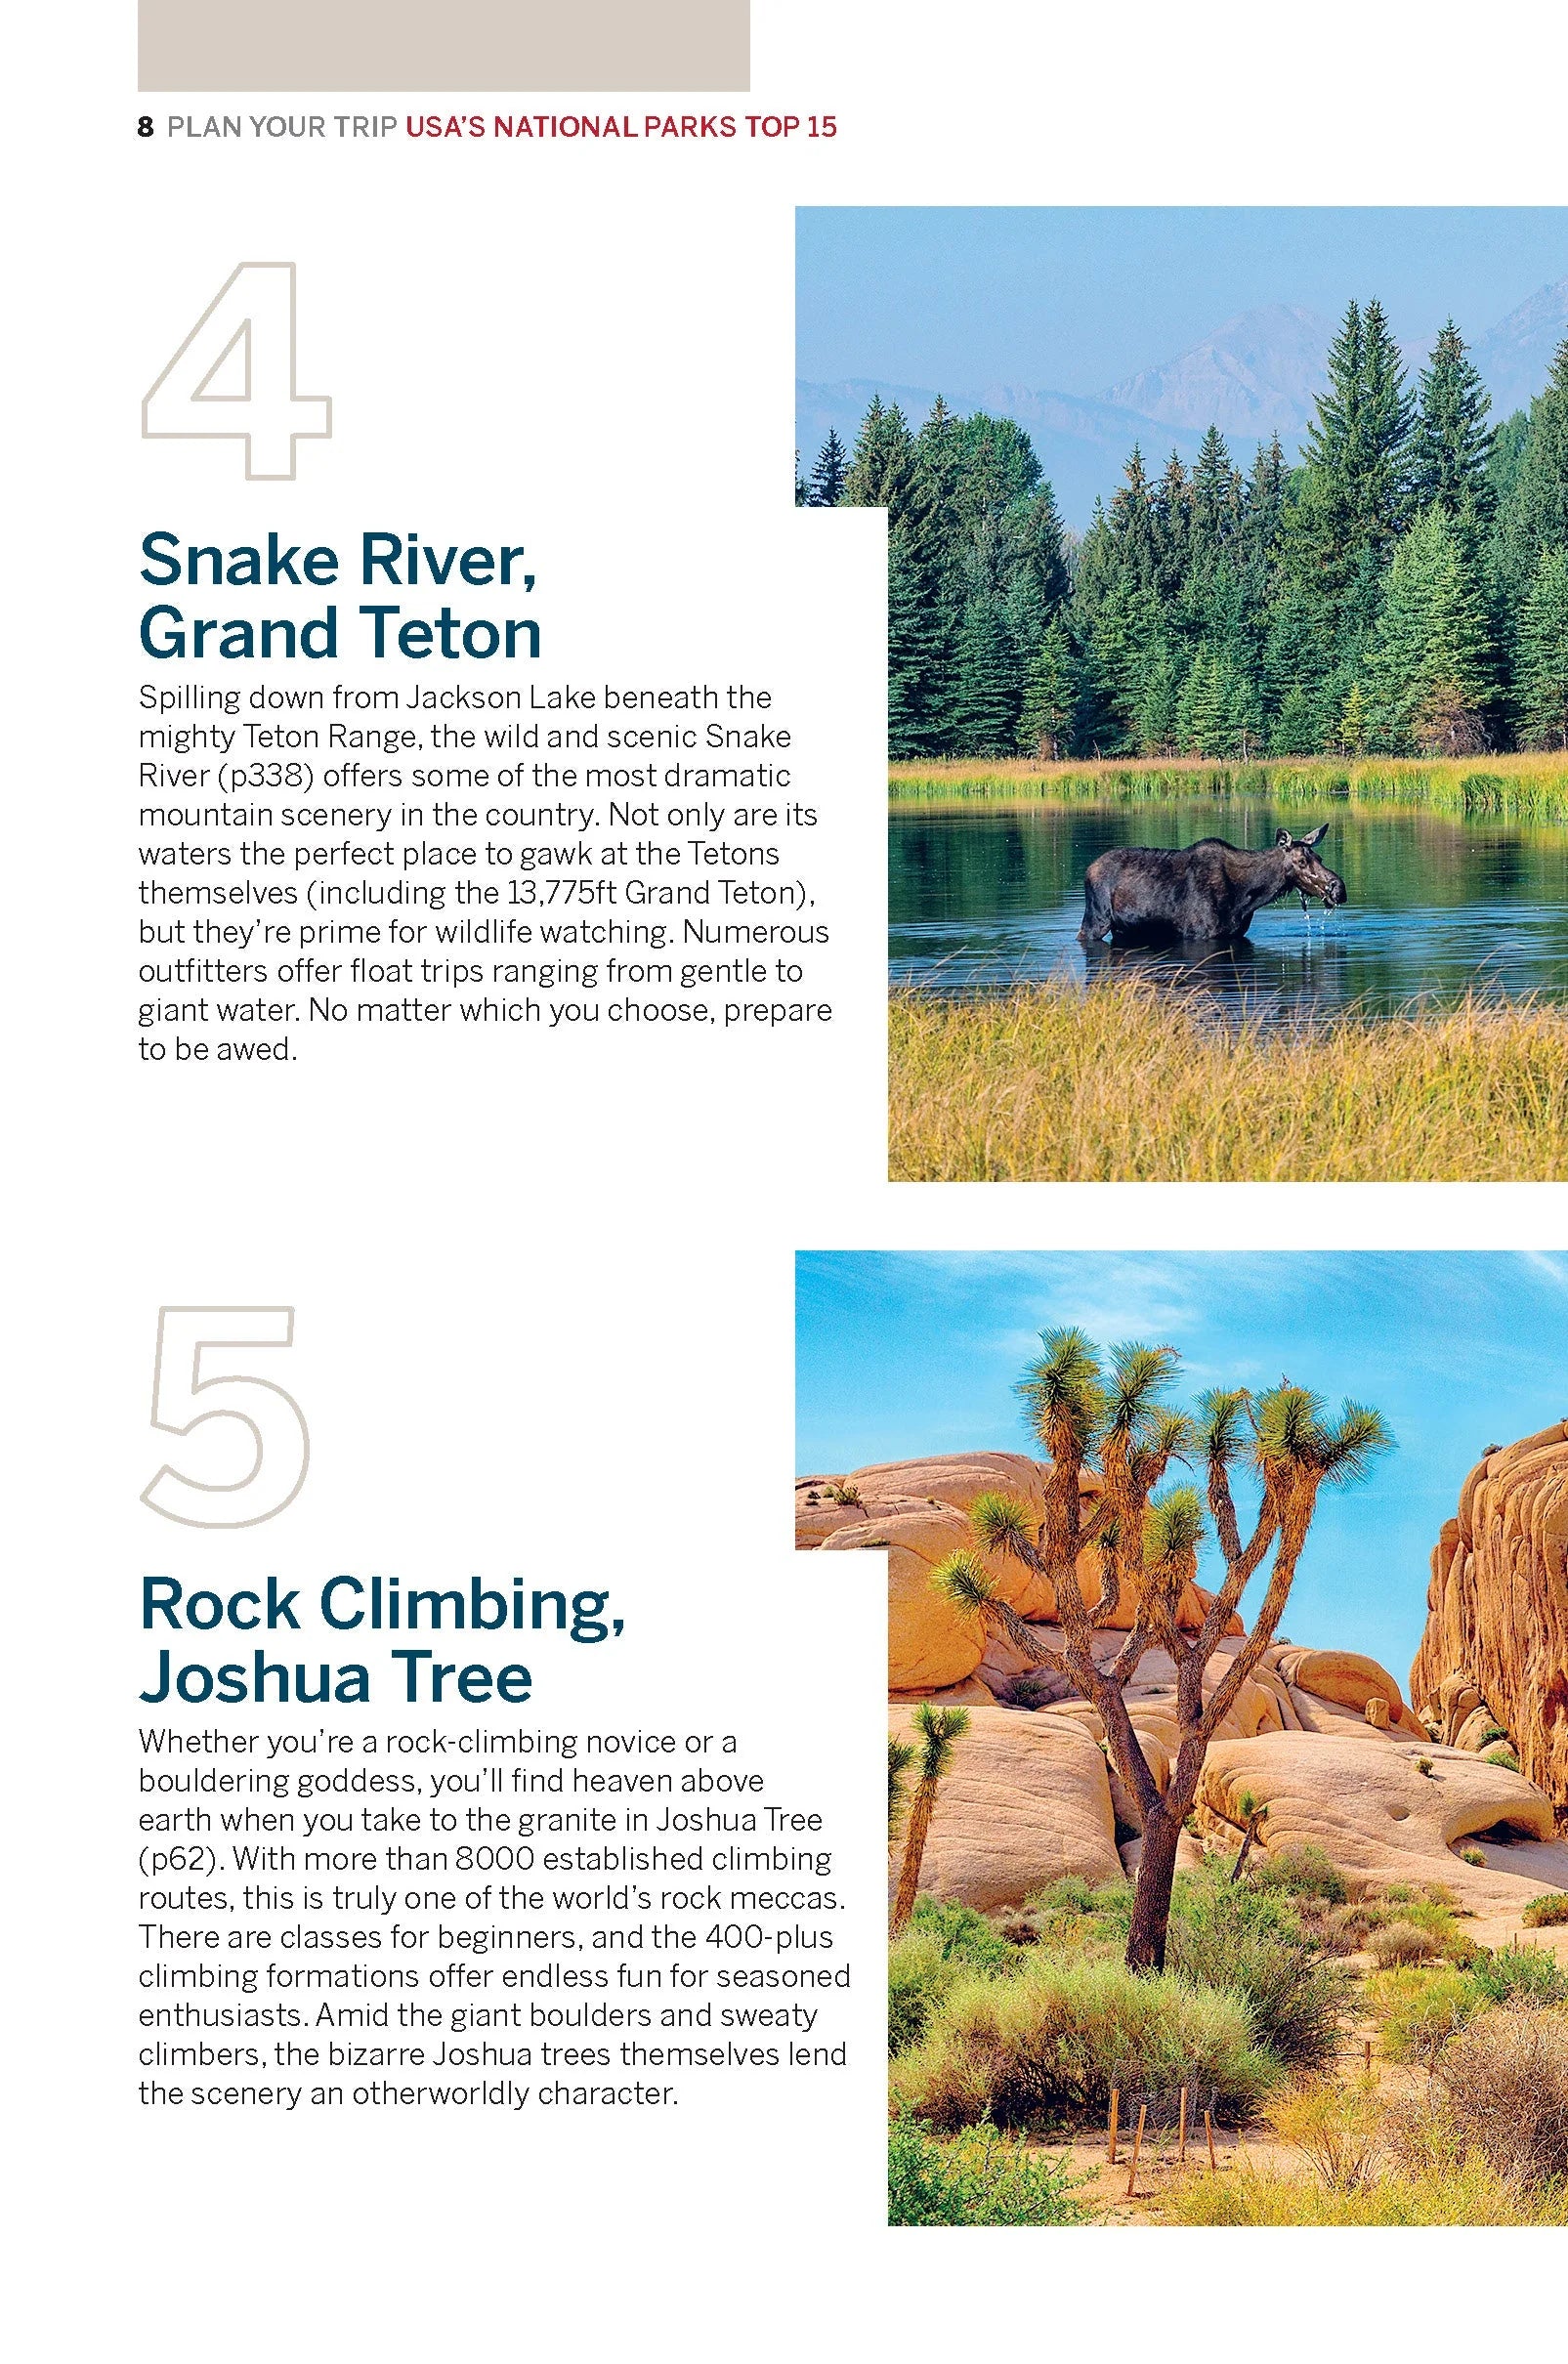 USA's National Parks - Lonely Planet